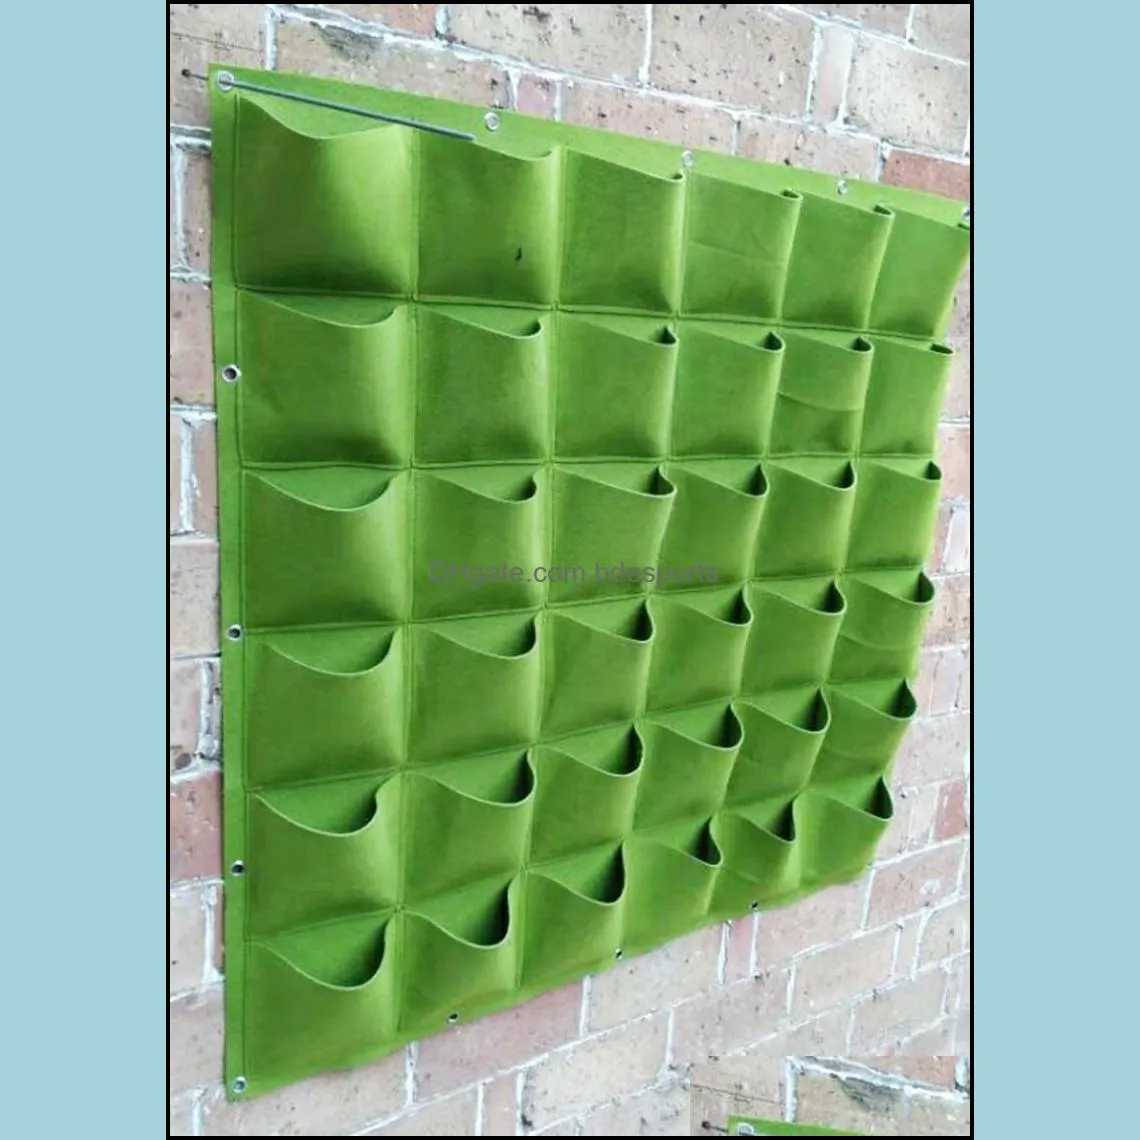 9/18/36/64 Planters Pockets Green Grow Bags Planter Vertical Garden Vegetable Living Gardening Pots Seedling Wall Hanging Plant Growing